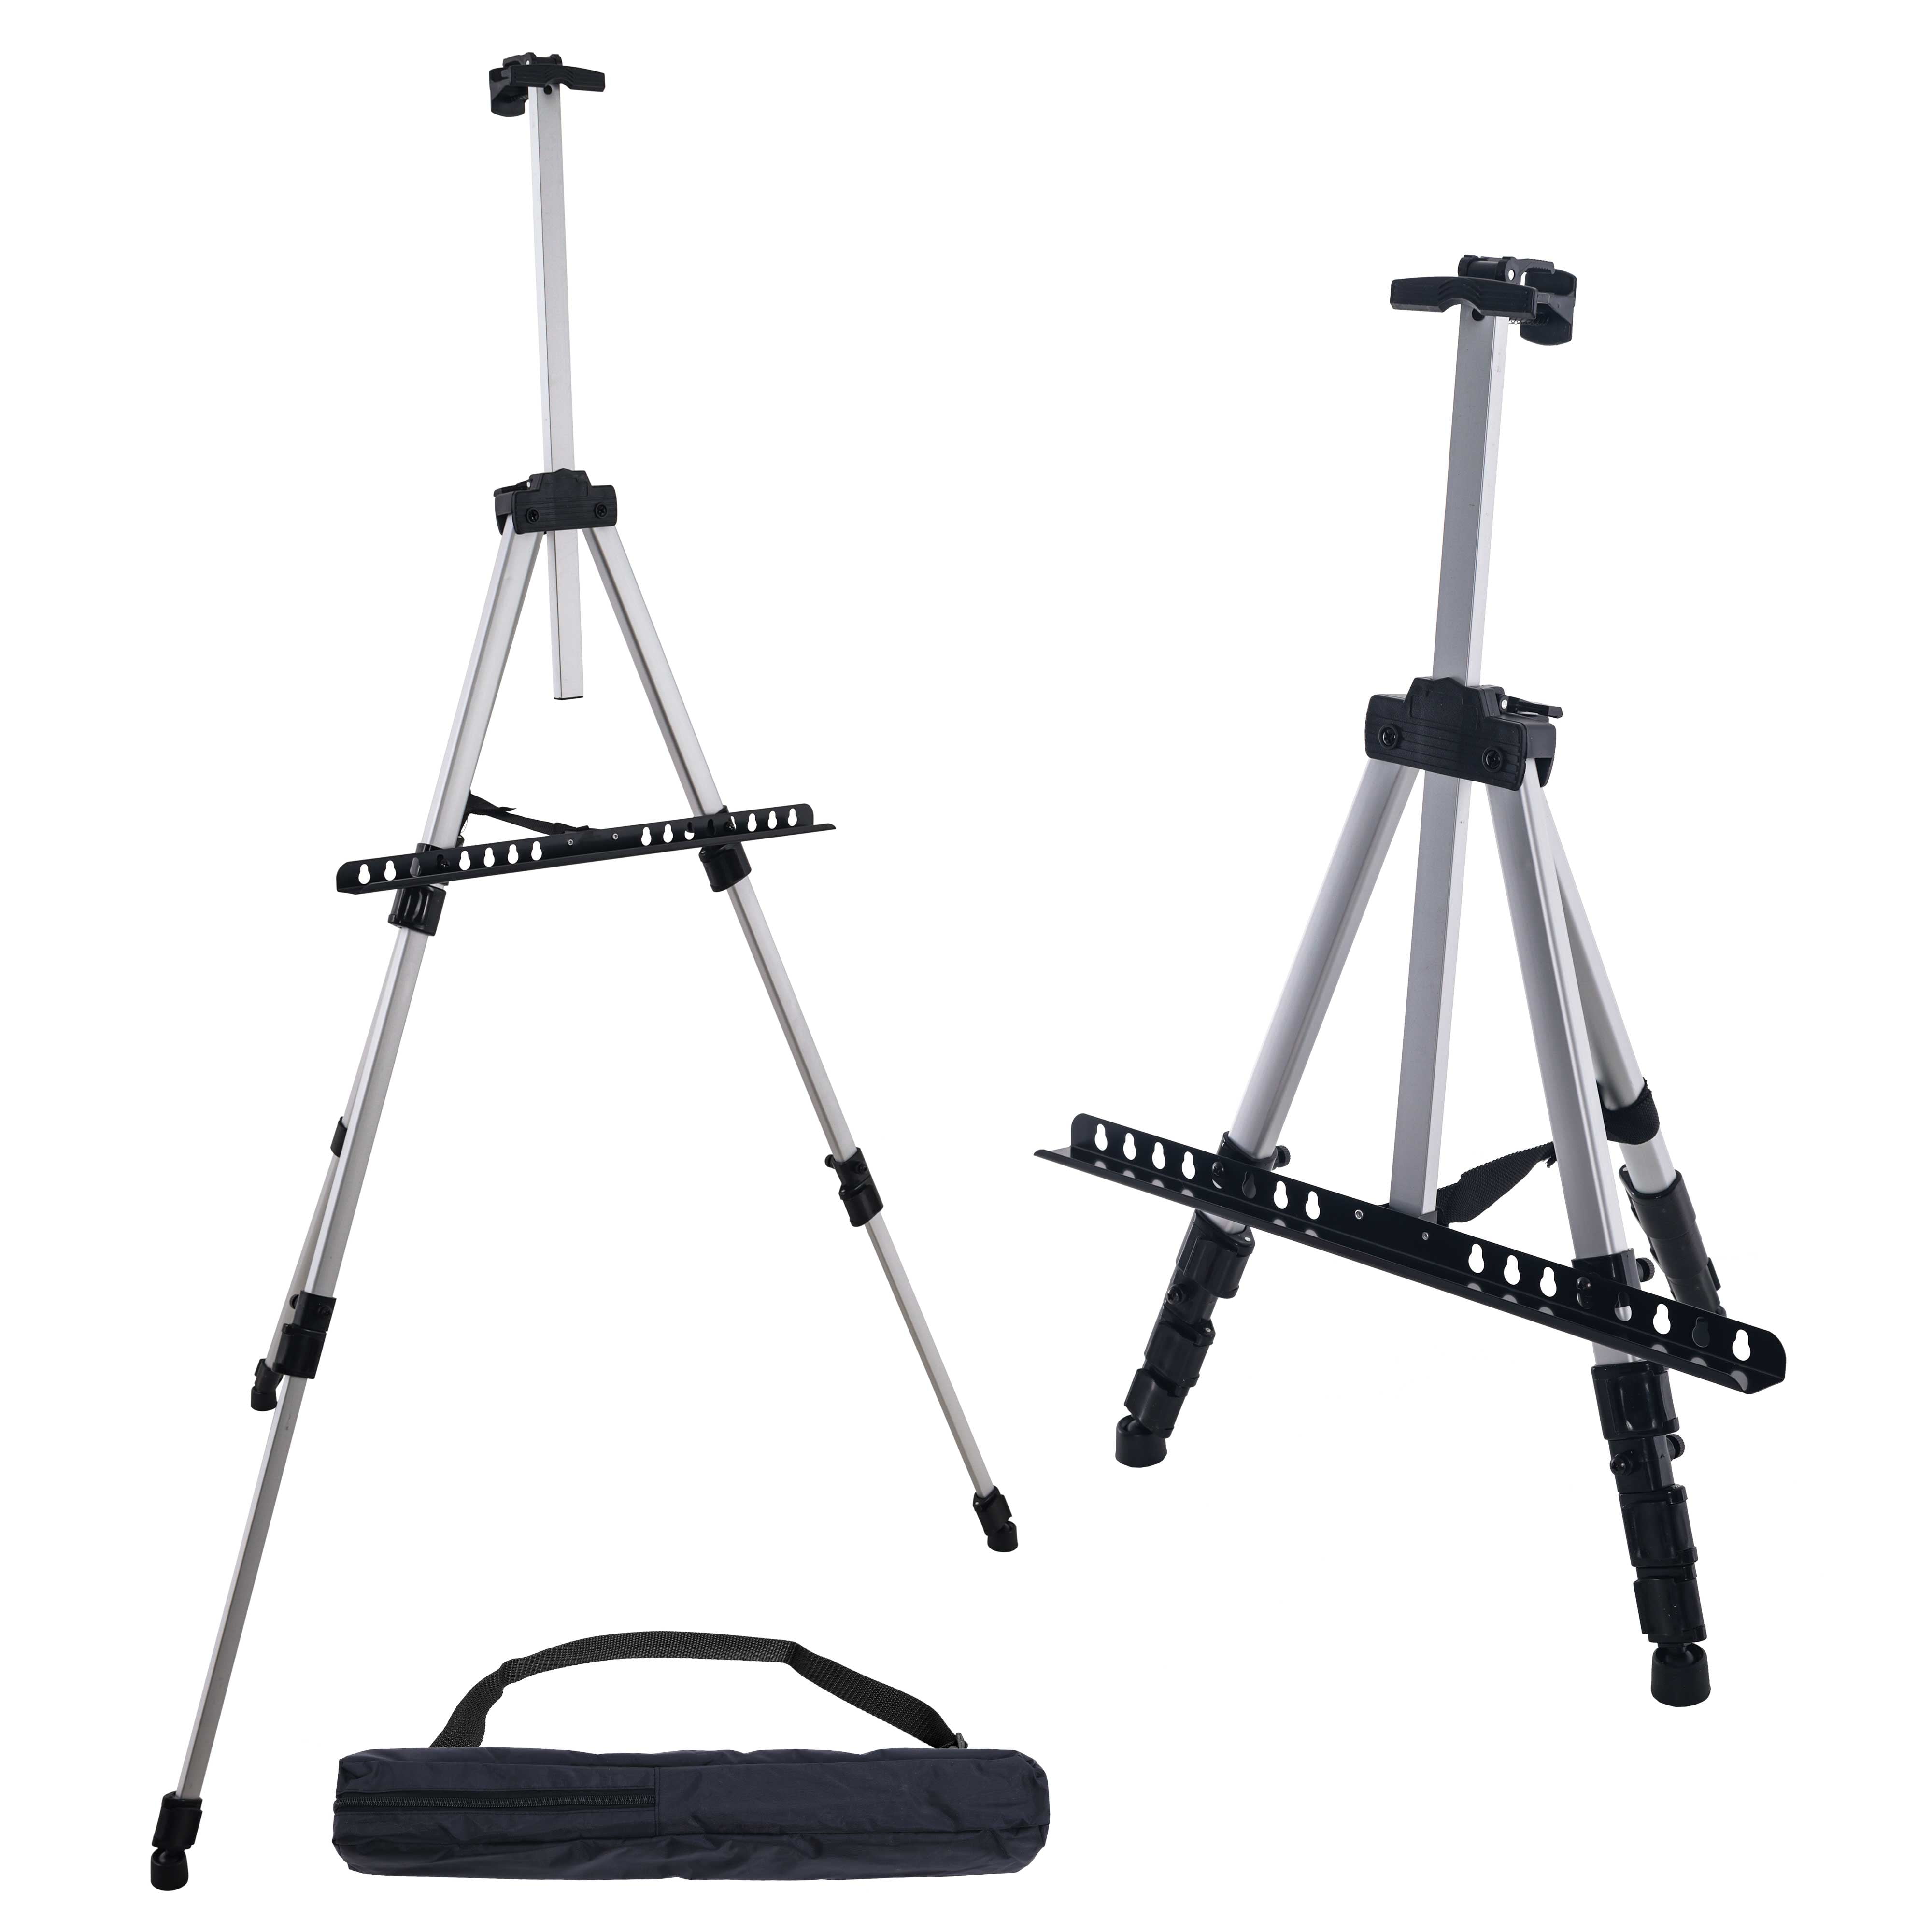 JNZYB Art Painting Easel Stand - Portable Adjustable Easel Tripod - Large  Standing Floor Adults Easel for Drawing & Display - Black Metal Canvas Stand